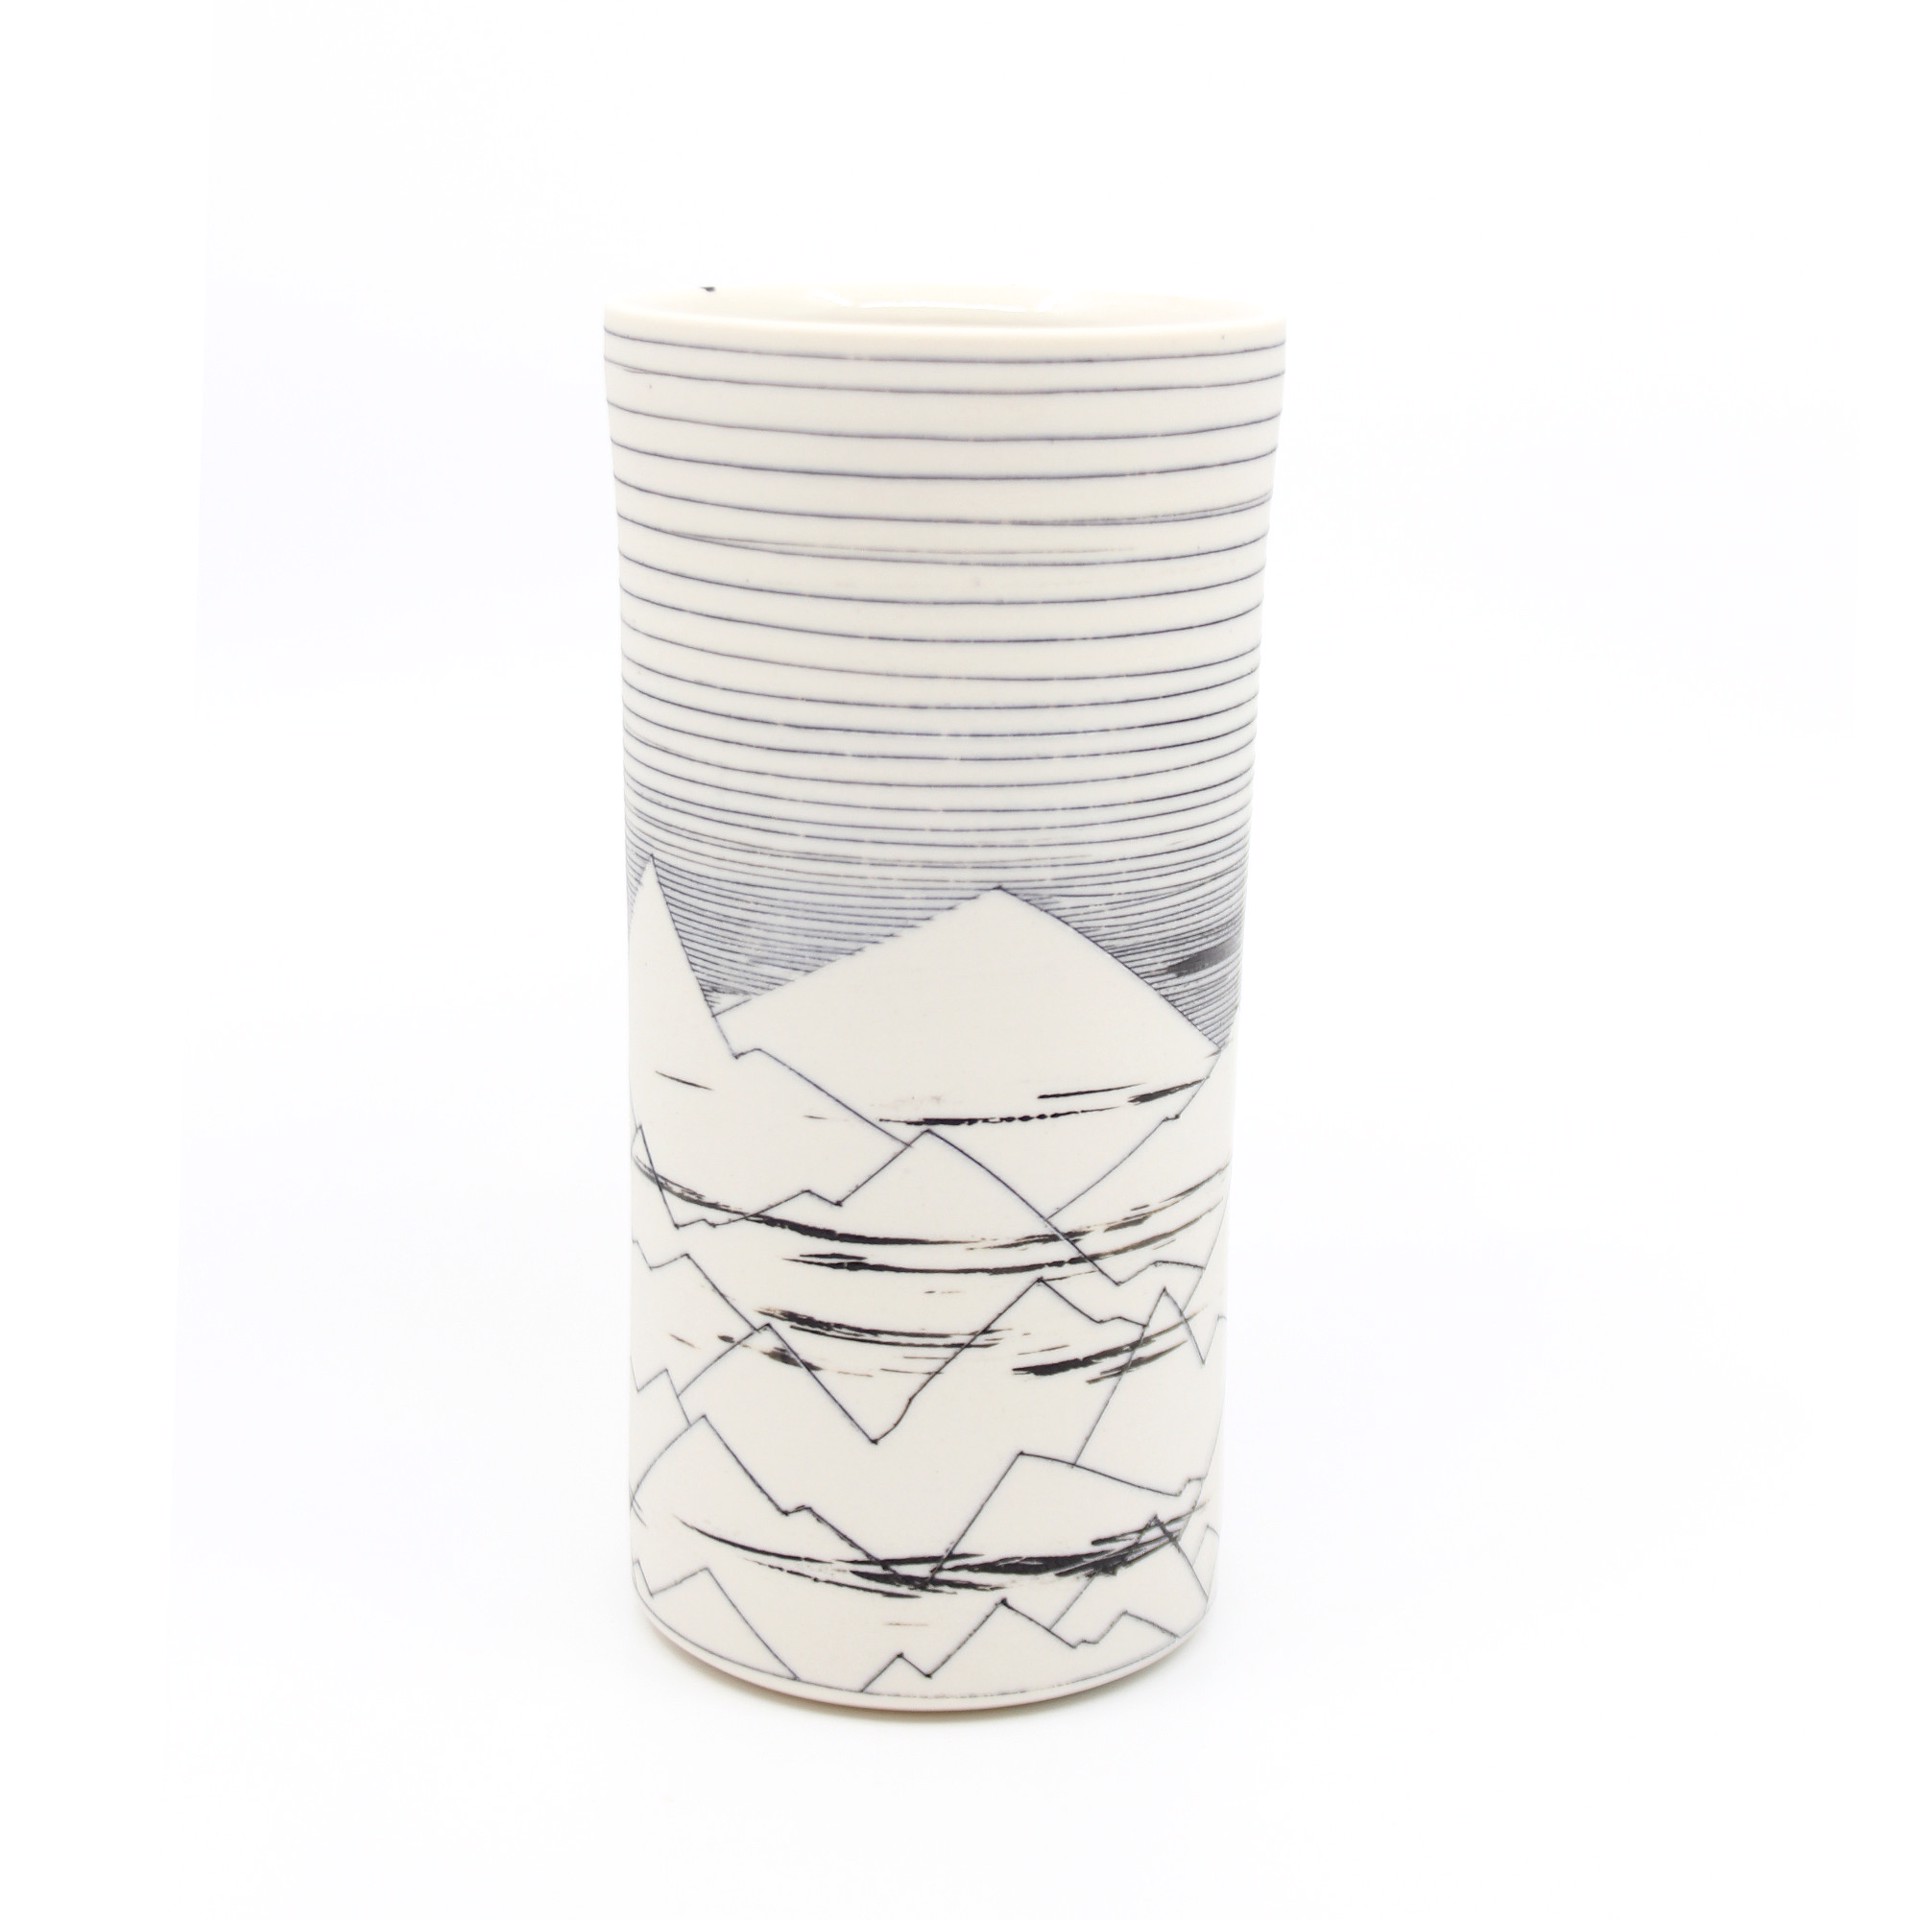 Landscape Cup I by Bianka Groves